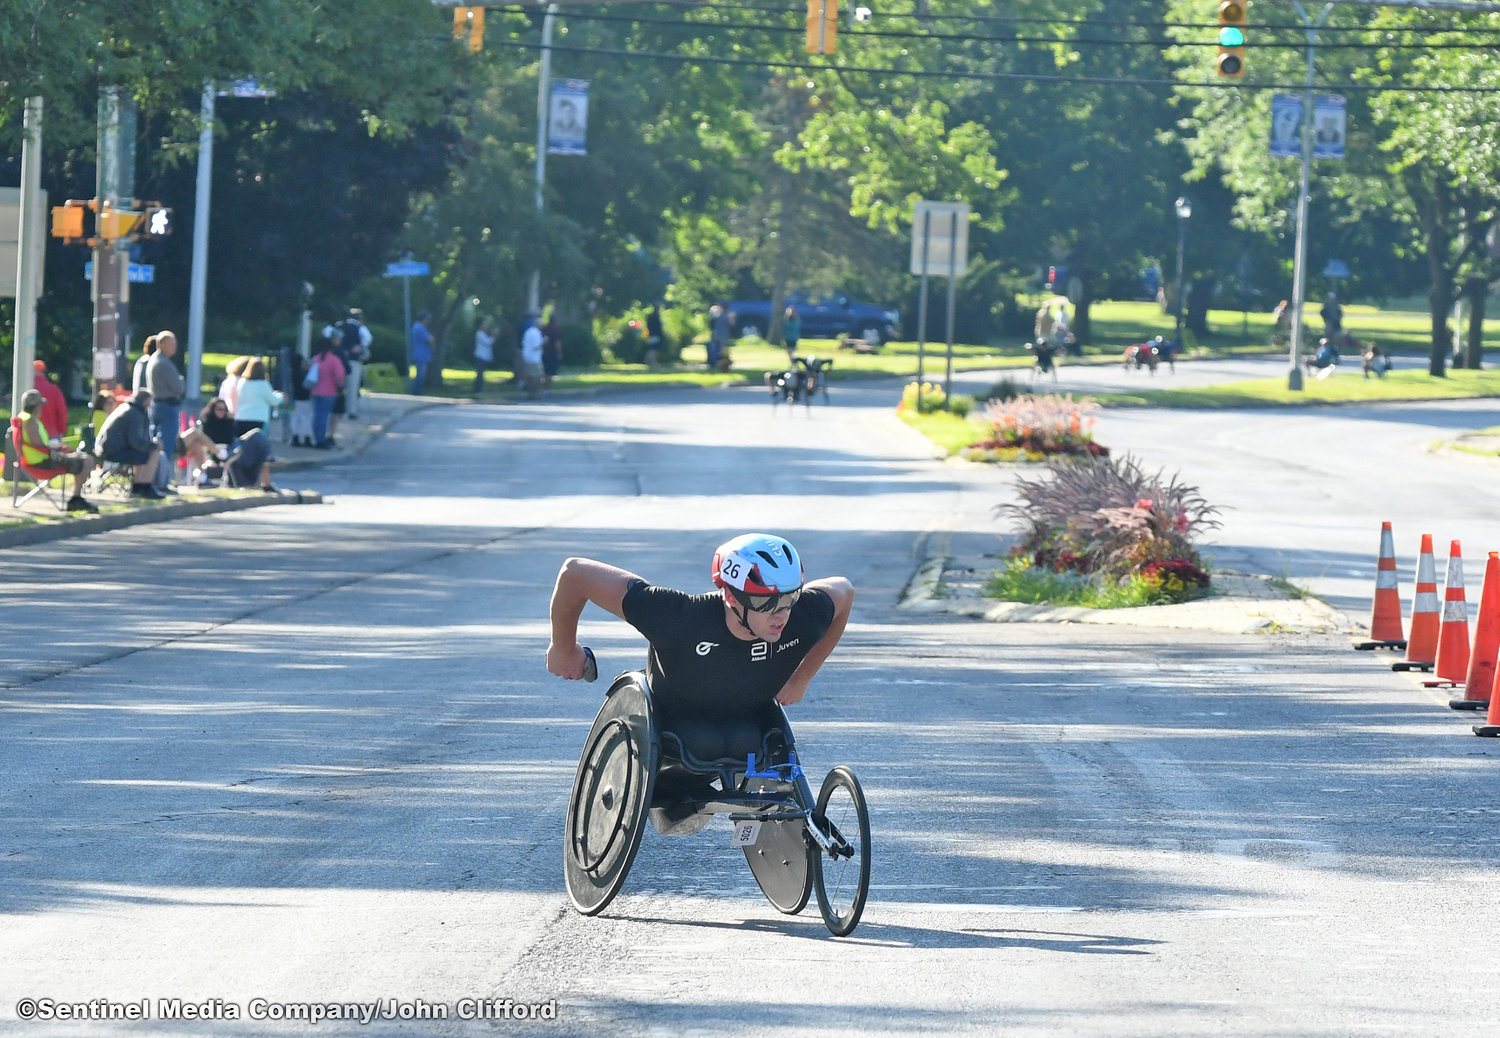 The first wheelchair racer of the 45th Boilermaker Road Race makes the turn left from Memorial Parkway to Valley View Road.